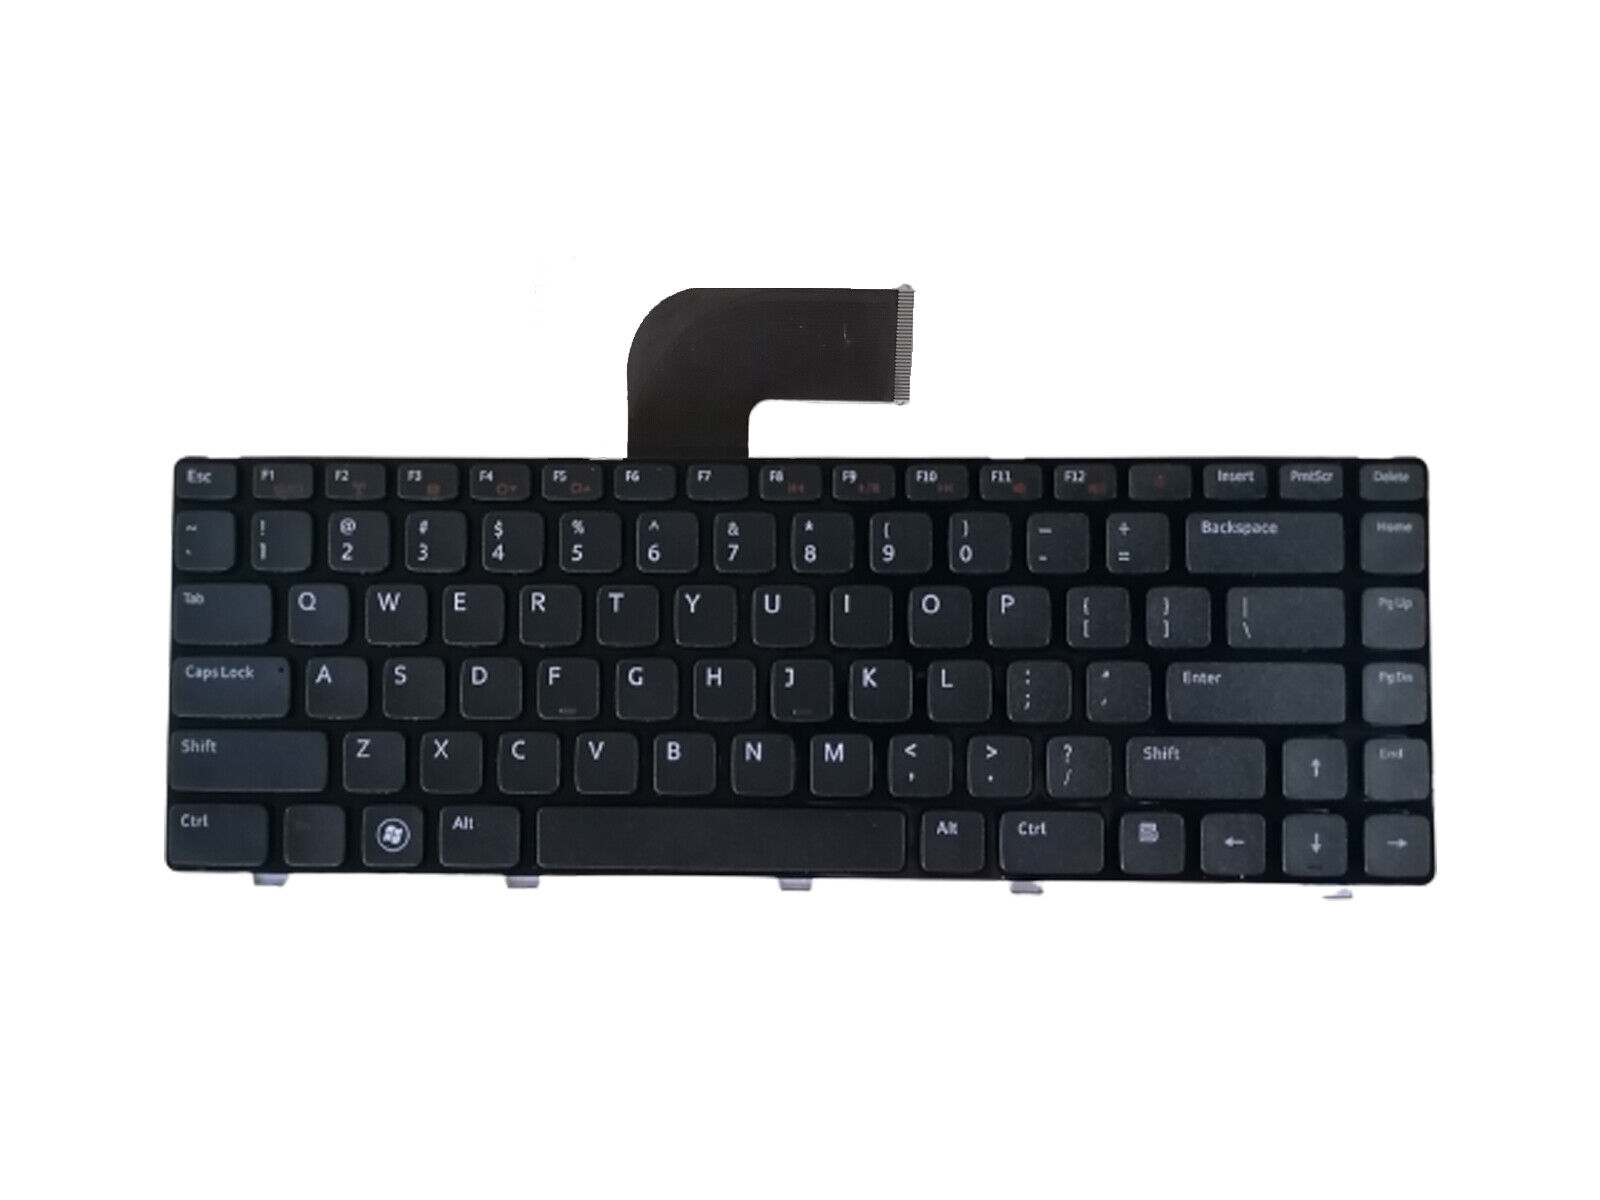 Keyboard for Dell Inspiron M5040 M5050 N4110 N5040 N5050 Laptops Replaces X38K3. Available Now for 14.90